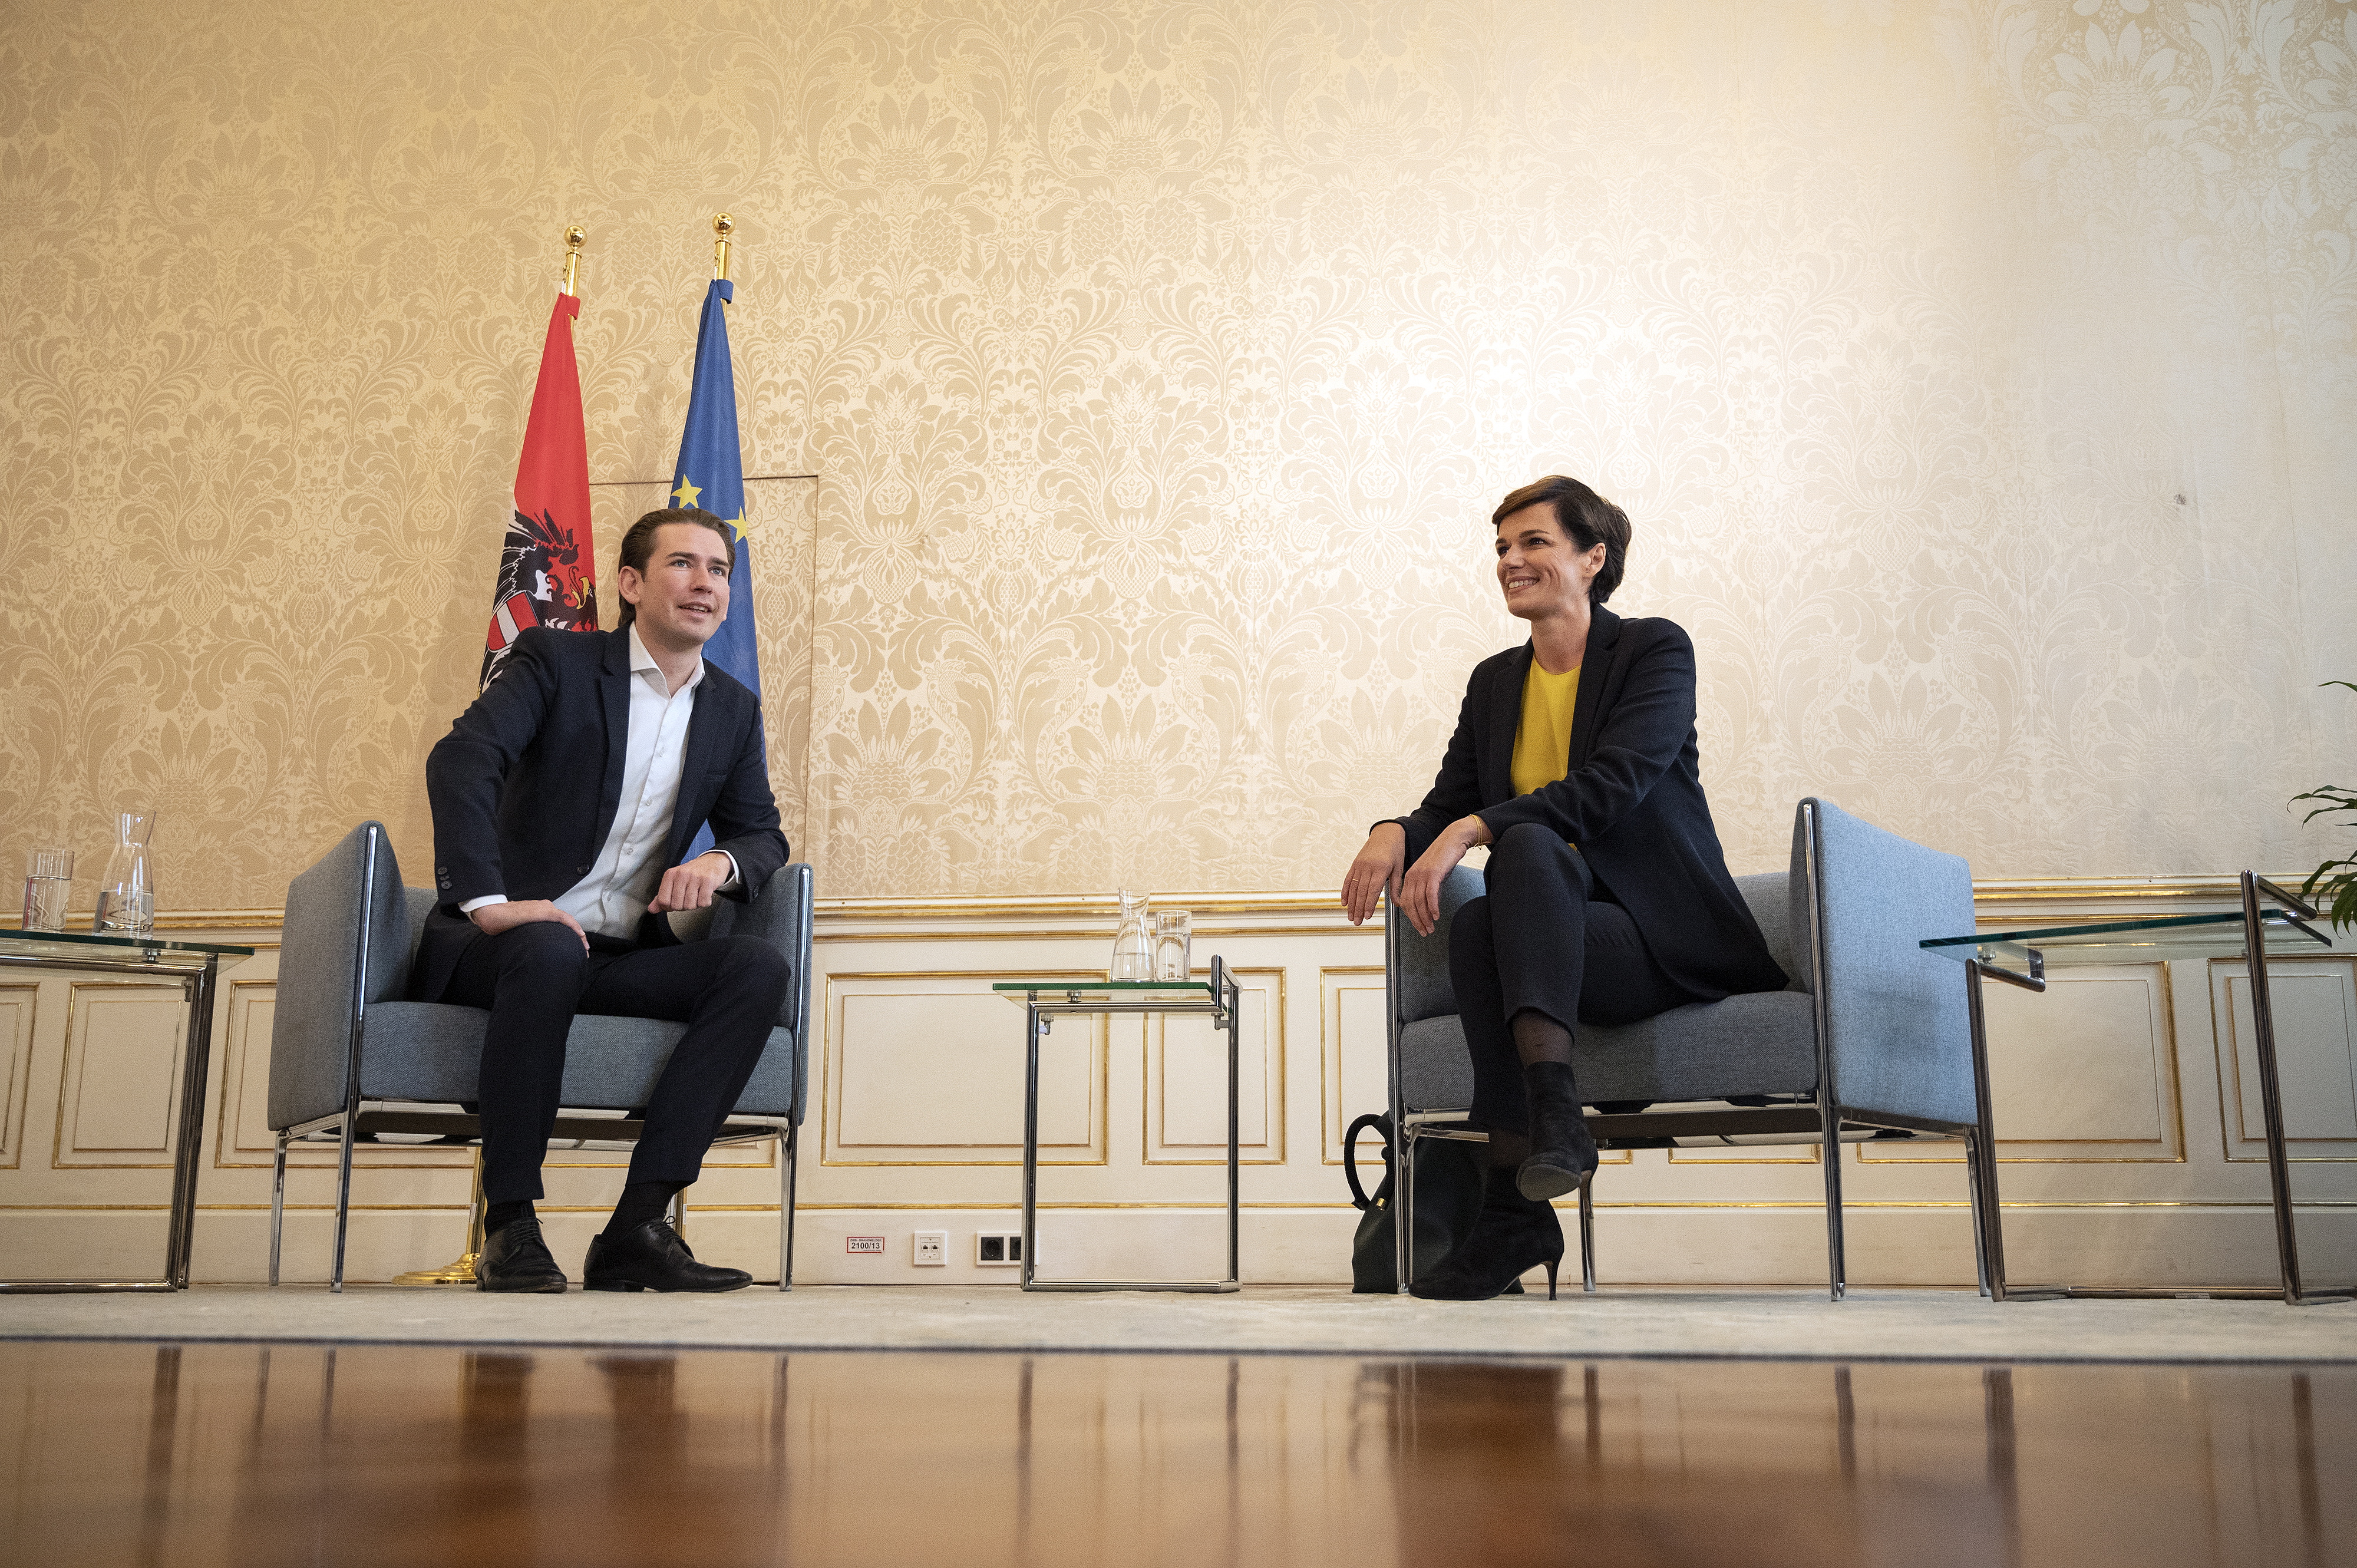 epa07905074 Sebastian Kurz (L), leader of Austrian People's Party (OeVP) and Pamela Rendi-Wagner (R), leader of Austrian Social Democratic Party (SPOe) pose for photographs ahead of exploratory talks at the Winter Palace of Prince Eugene in Vienna, Austria, 08 October 2019. Austrian President Alexander Van der Bellen gave Kurz the mandate to build a new coalition government on 07 October 2019.  EPA/CHRISTIAN BRUNA